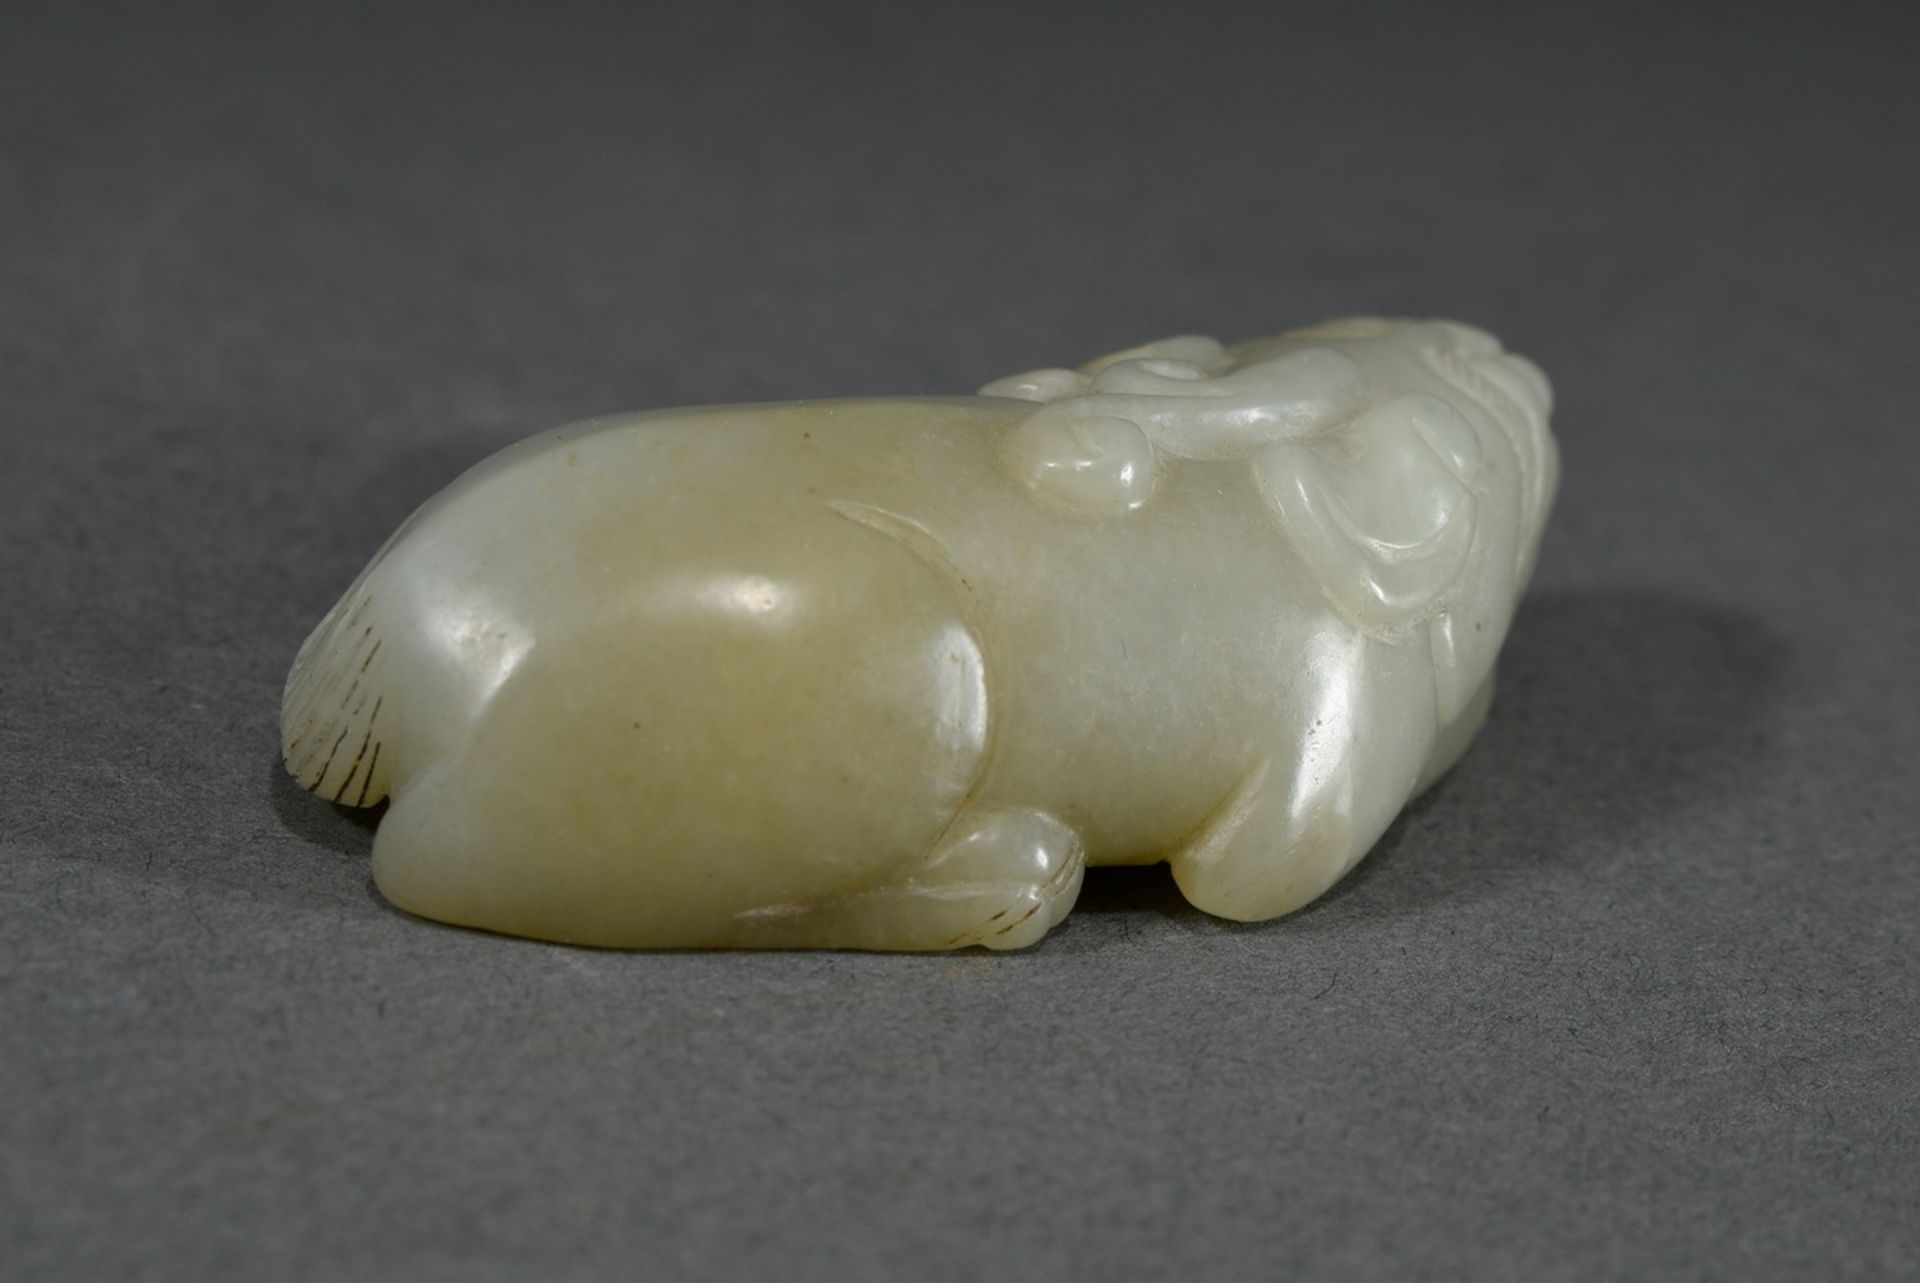 Fine celadon jade figure "Reclining Qilin" in Song style, China, l. 6cm - Image 3 of 4